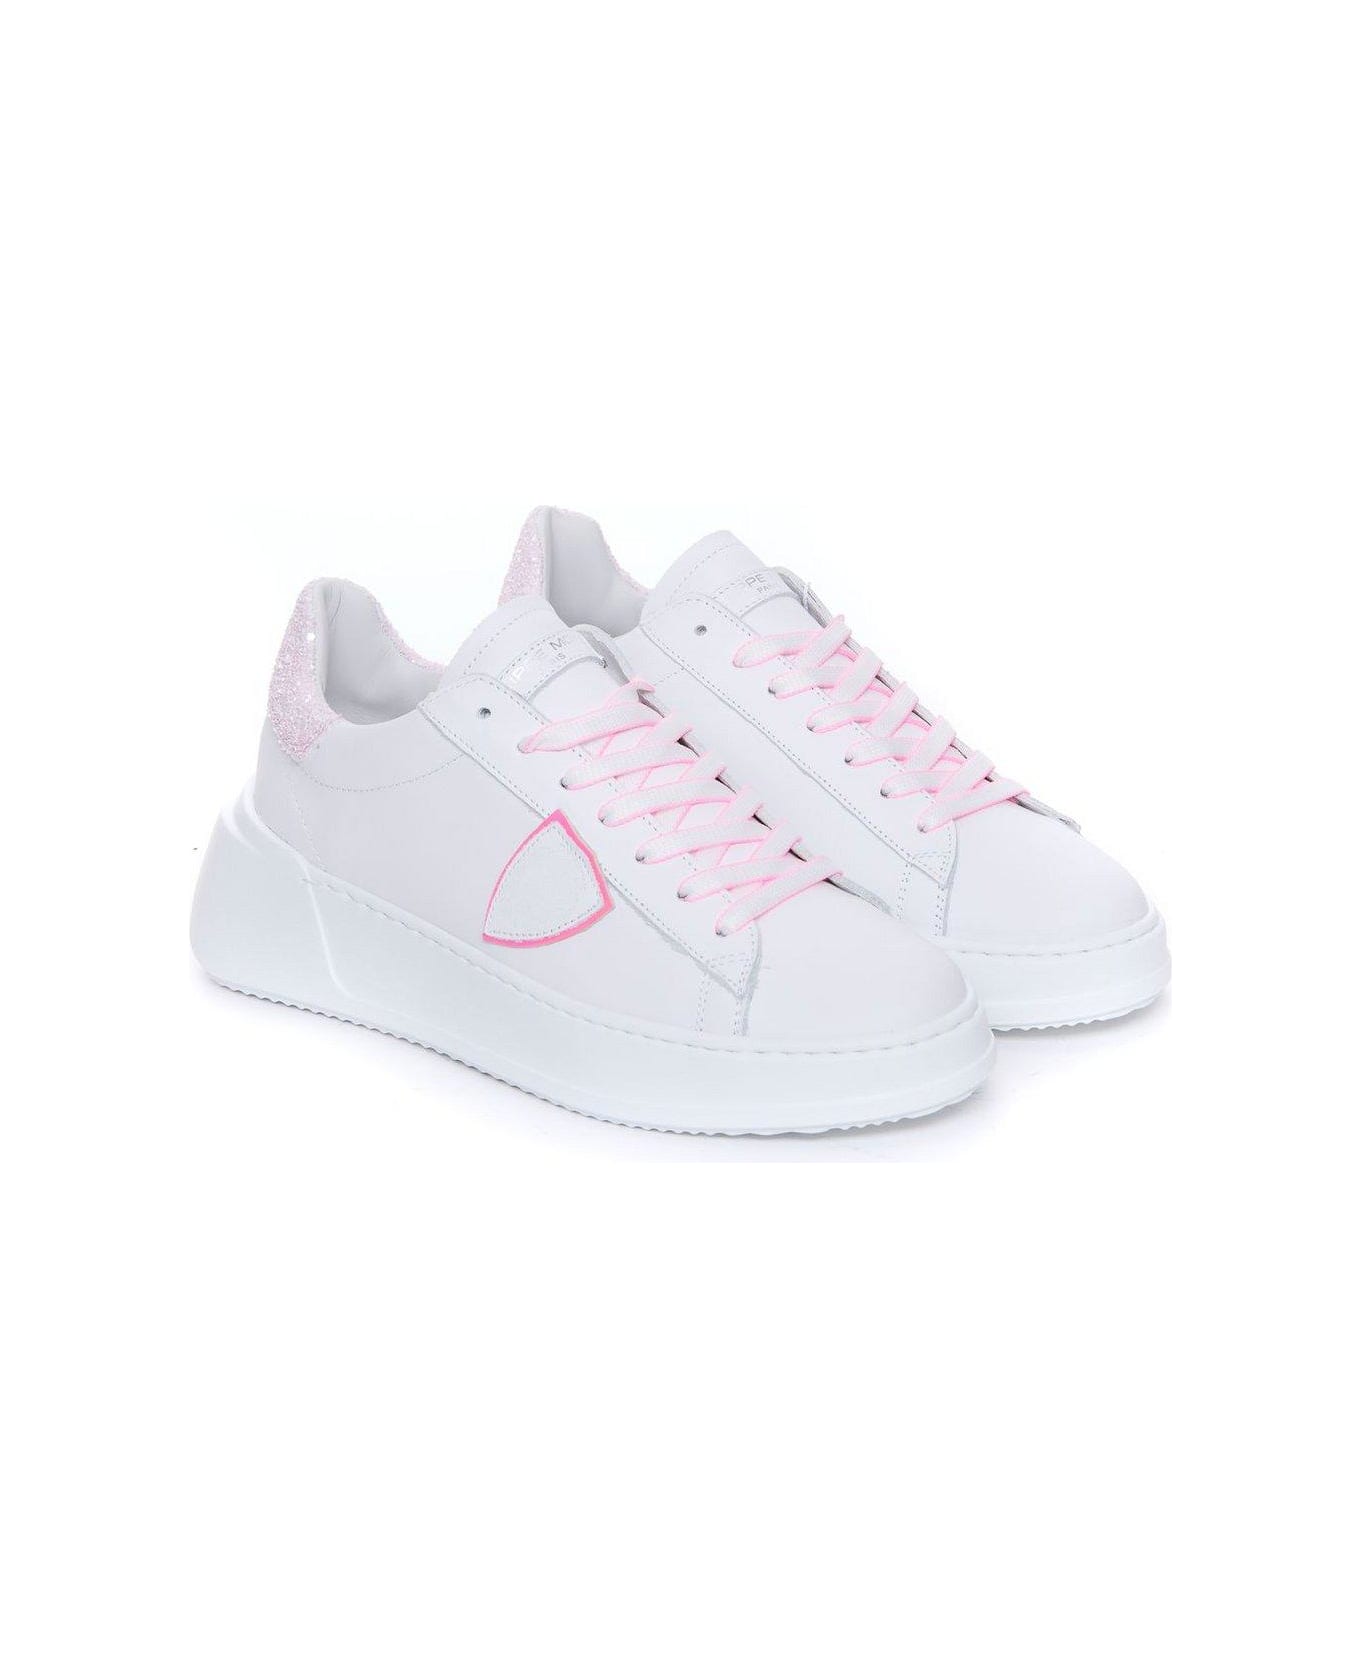 Philippe Model Tres Temple Lace Up Sneakers - Blanc Fucsia スニーカー